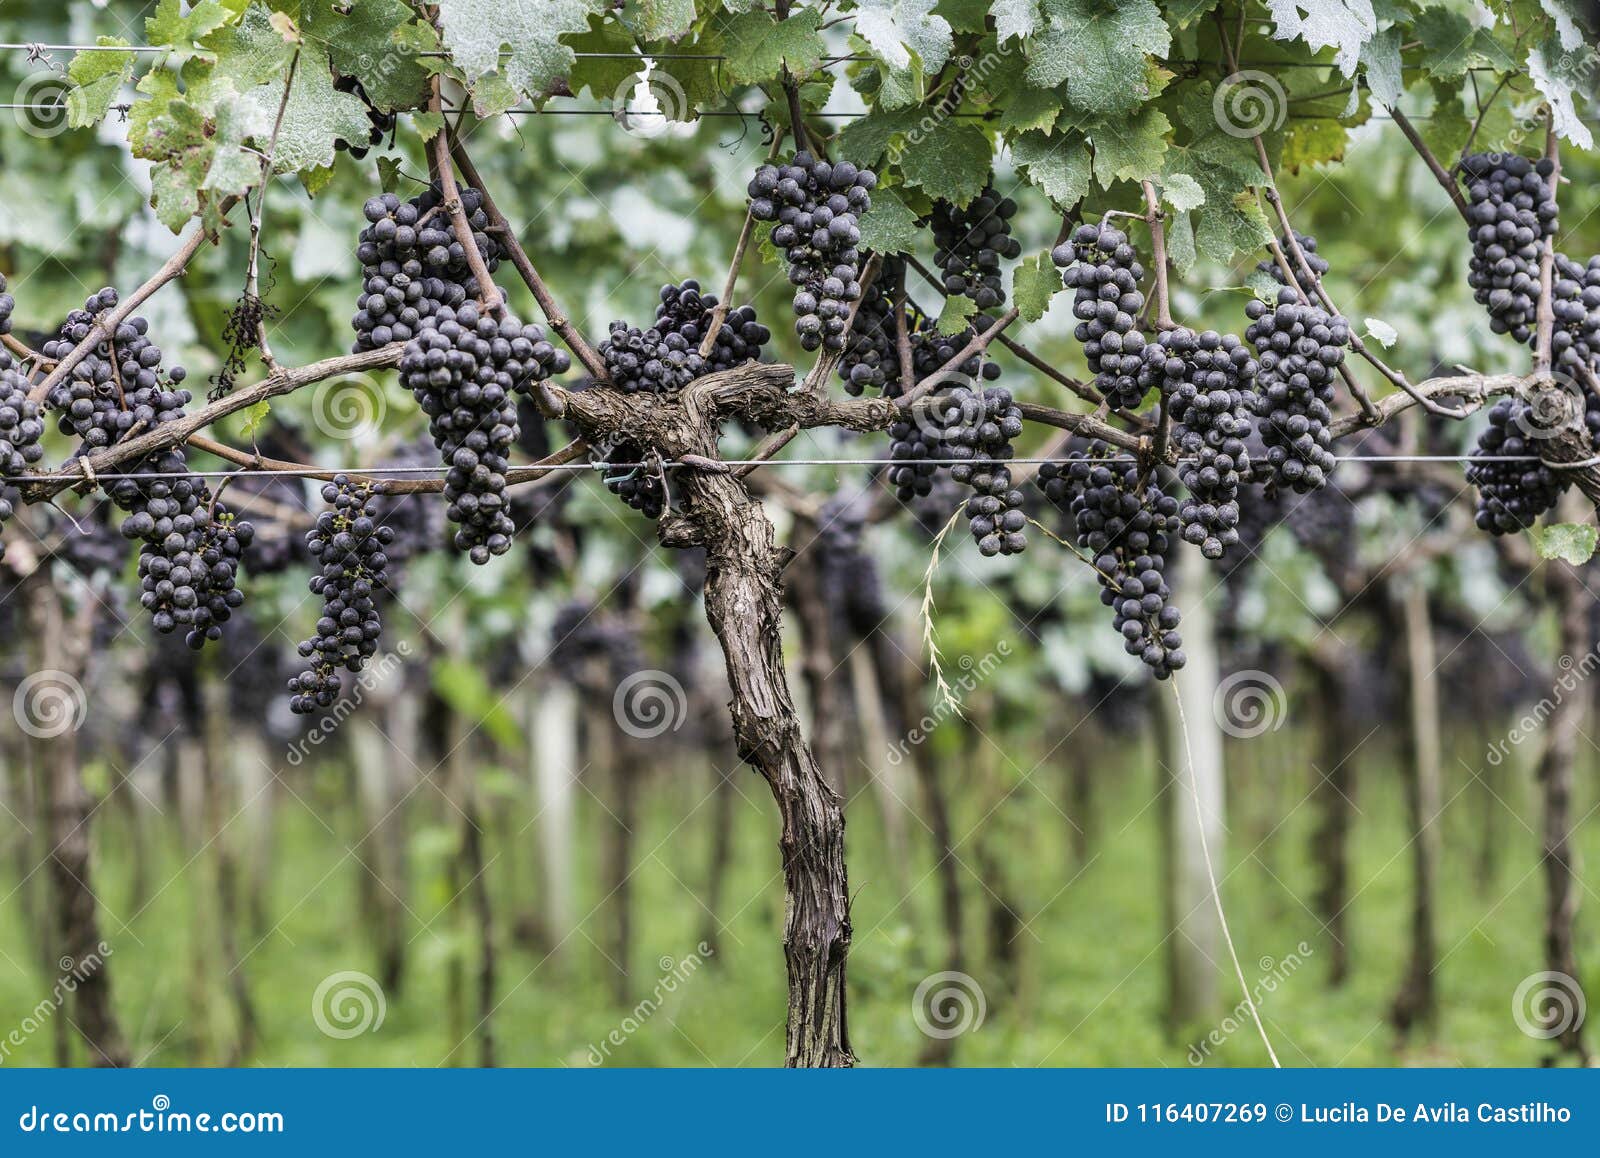 grapes ready to be harvested for the next wine production